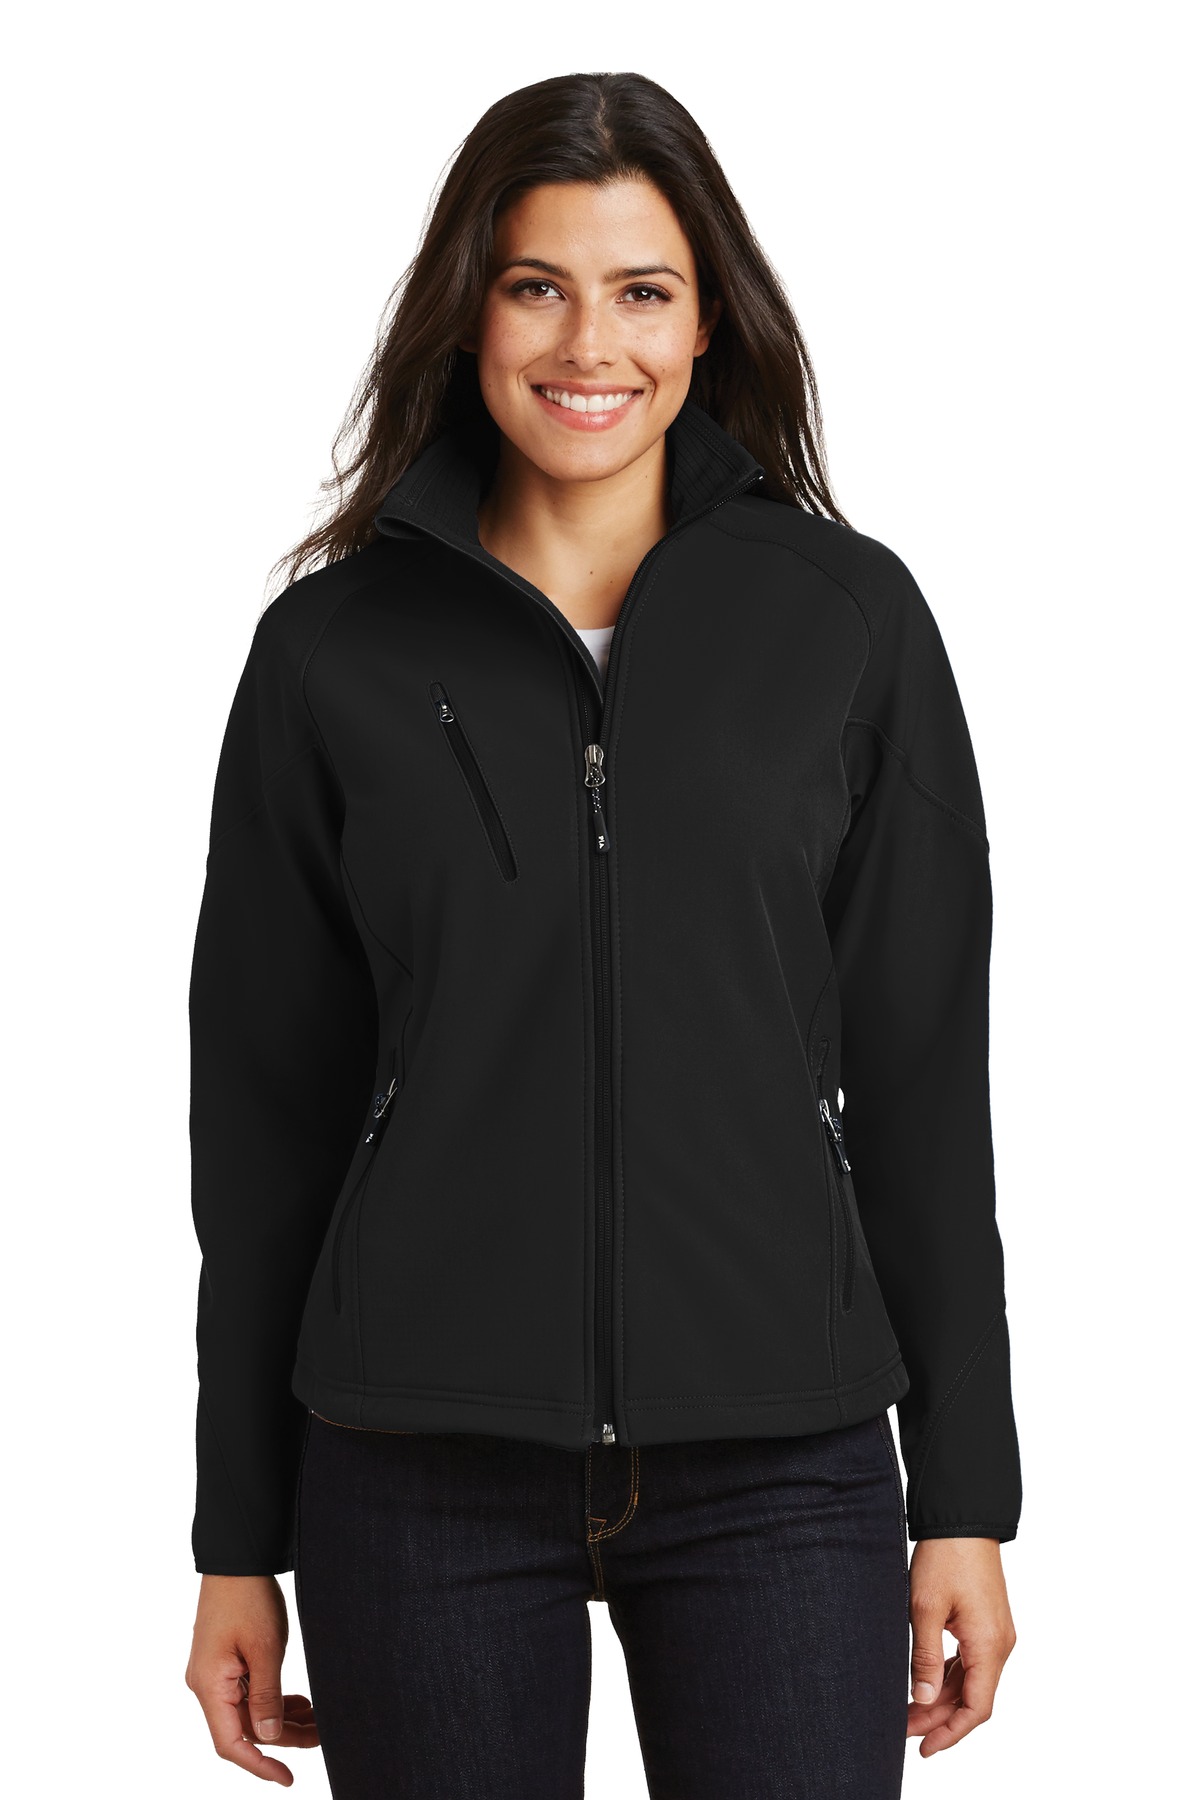 Port Authority Ladies Textured Soft Shell Jacket - L705